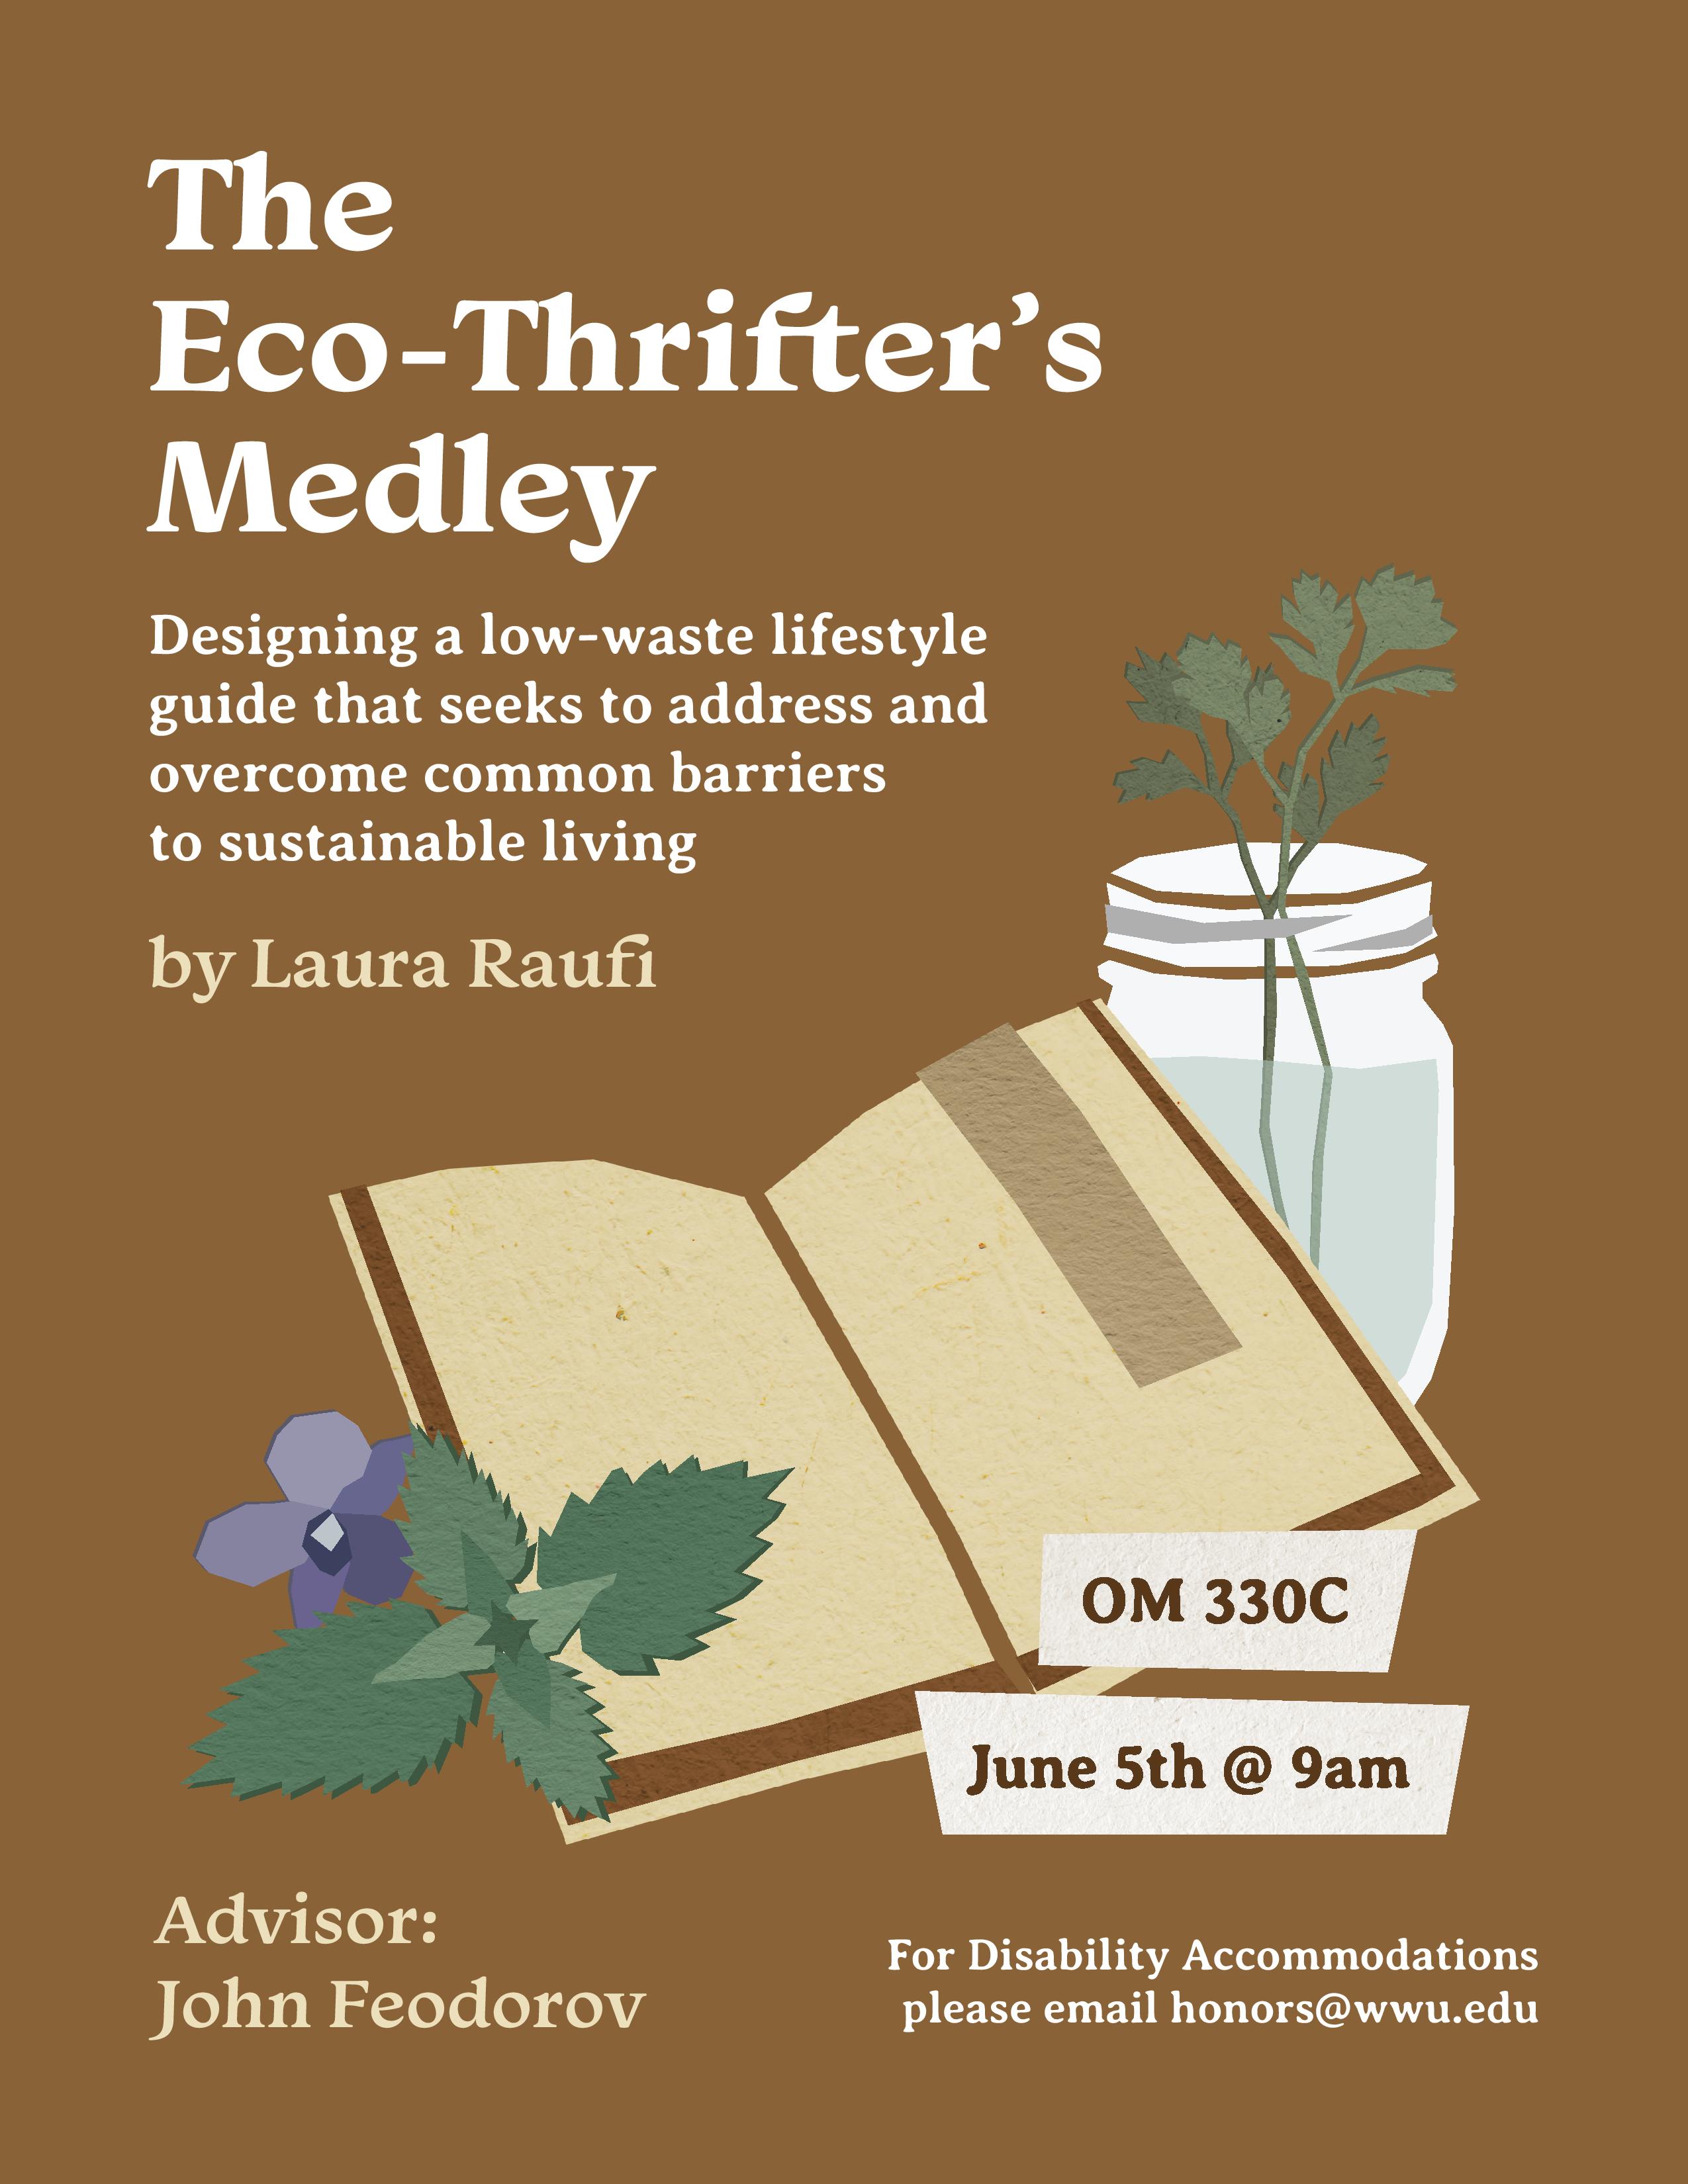 A brown poster with a drawings of a book with a jar of herb sprigs next to it. Text reads: "The Eco-Thrifter's Medley. Designing a low-waste lifestyle guide that seeks to address and overcome common barriers to sustainable living. by Laura Raufi. OM 330C June 5th @ 9am. Advisor: John Feodorov. For disability accommodations please email honors@wwu.edu."